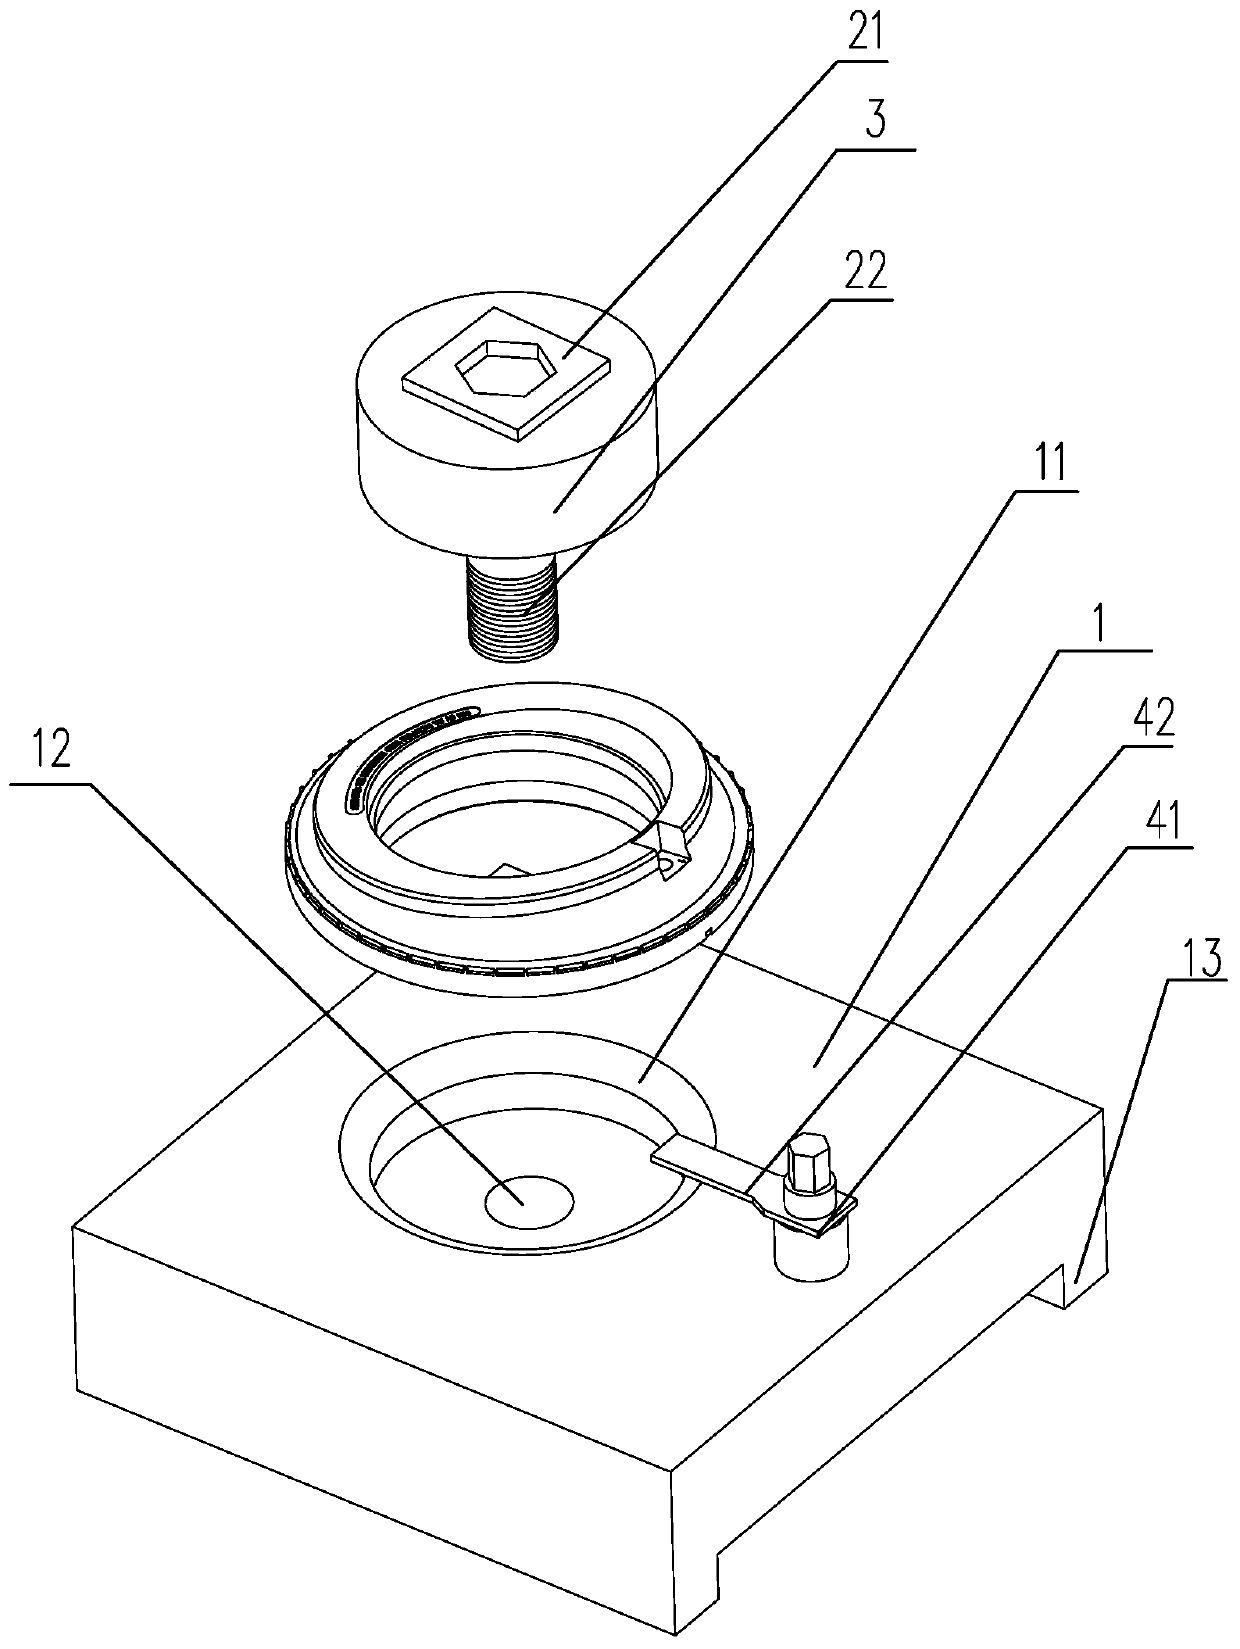 Shock absorber bearing load simulation test device